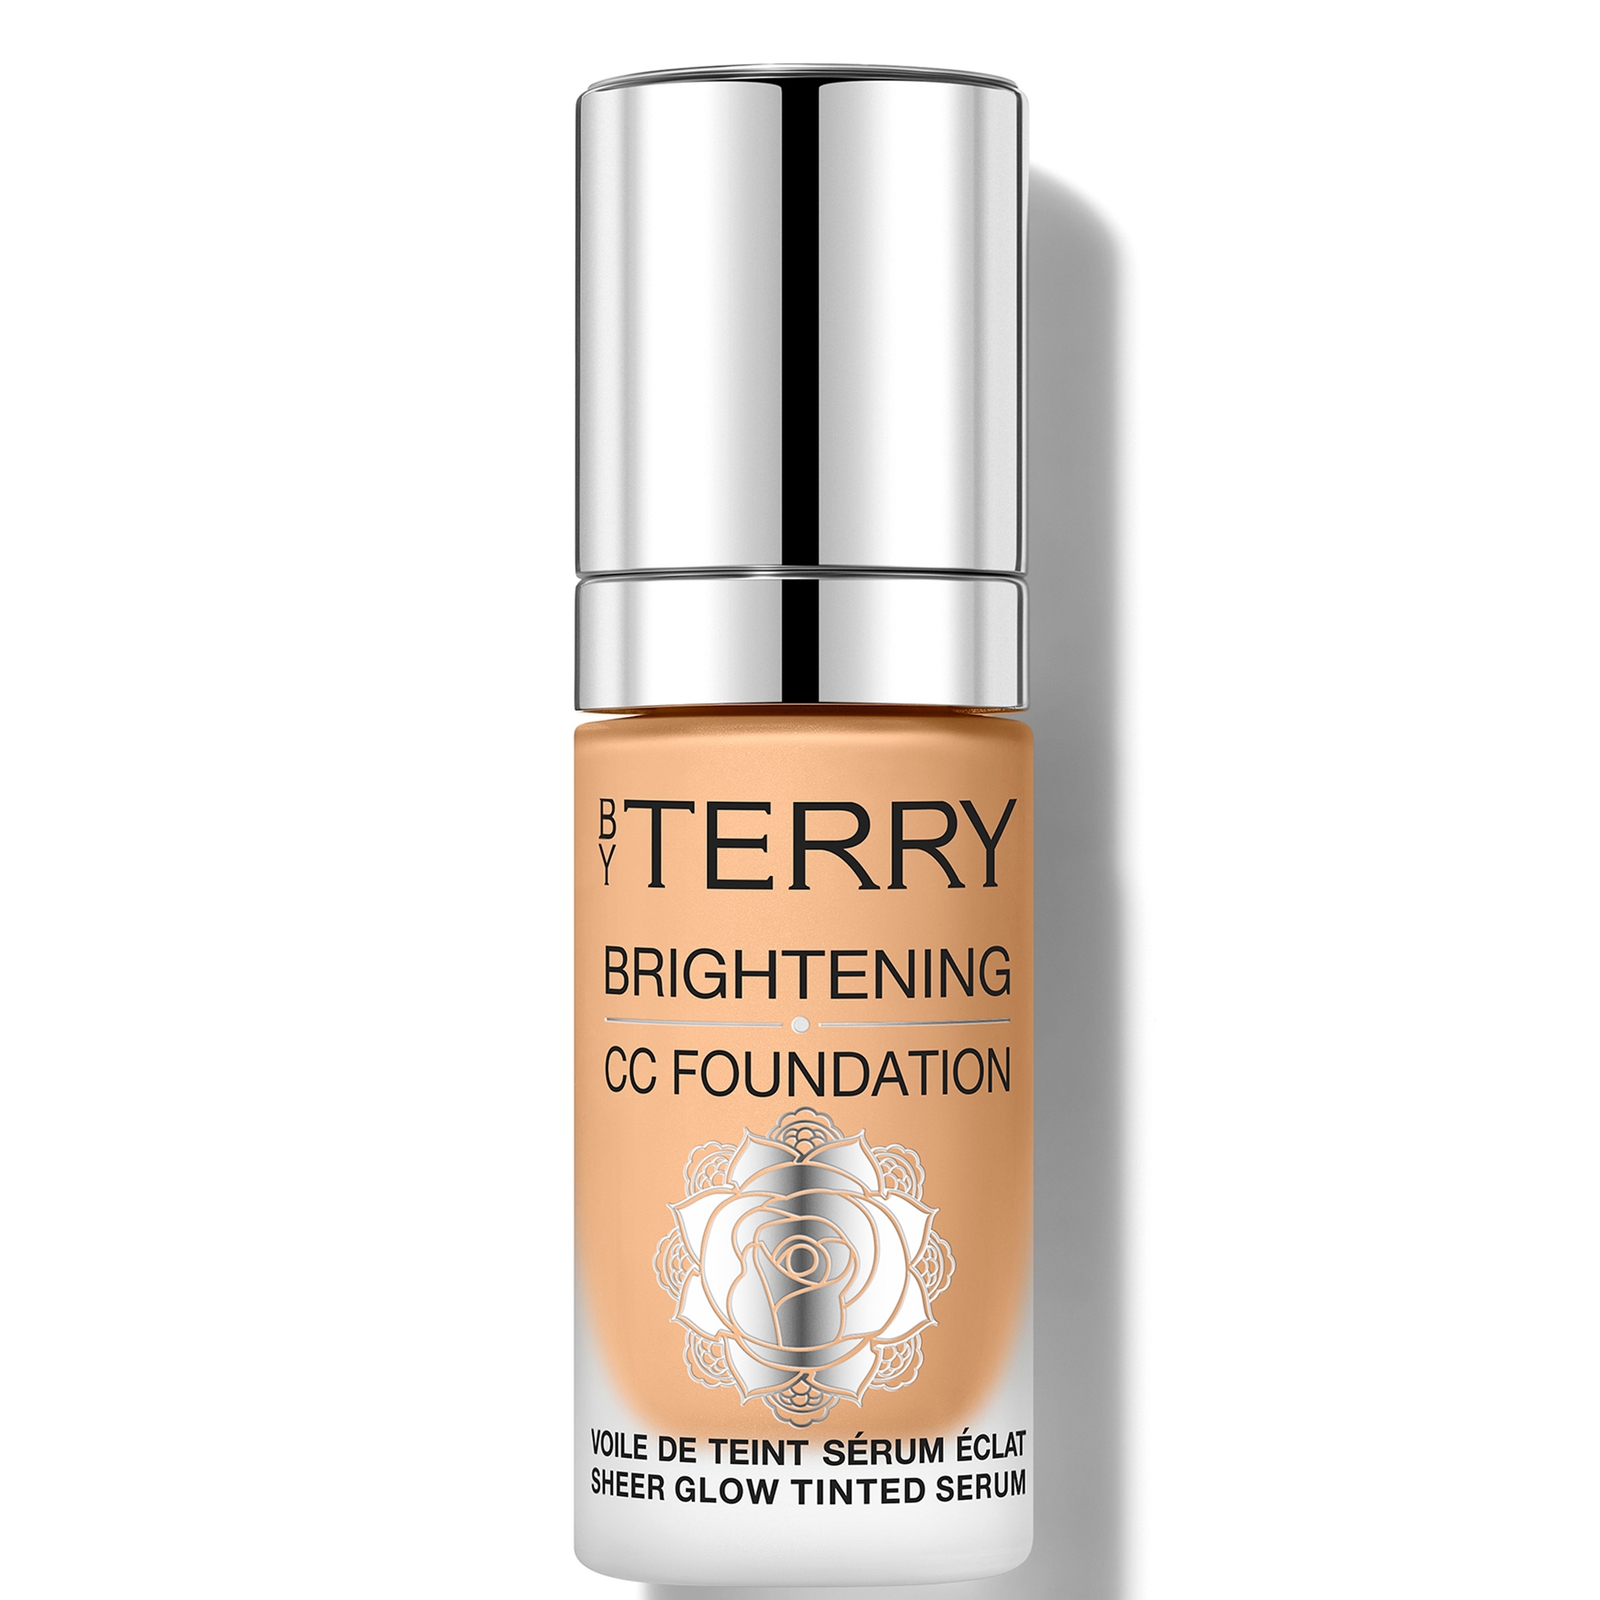 By Terry Brightening Cc Foundation 30ml (various Shades) - 5c In Brown